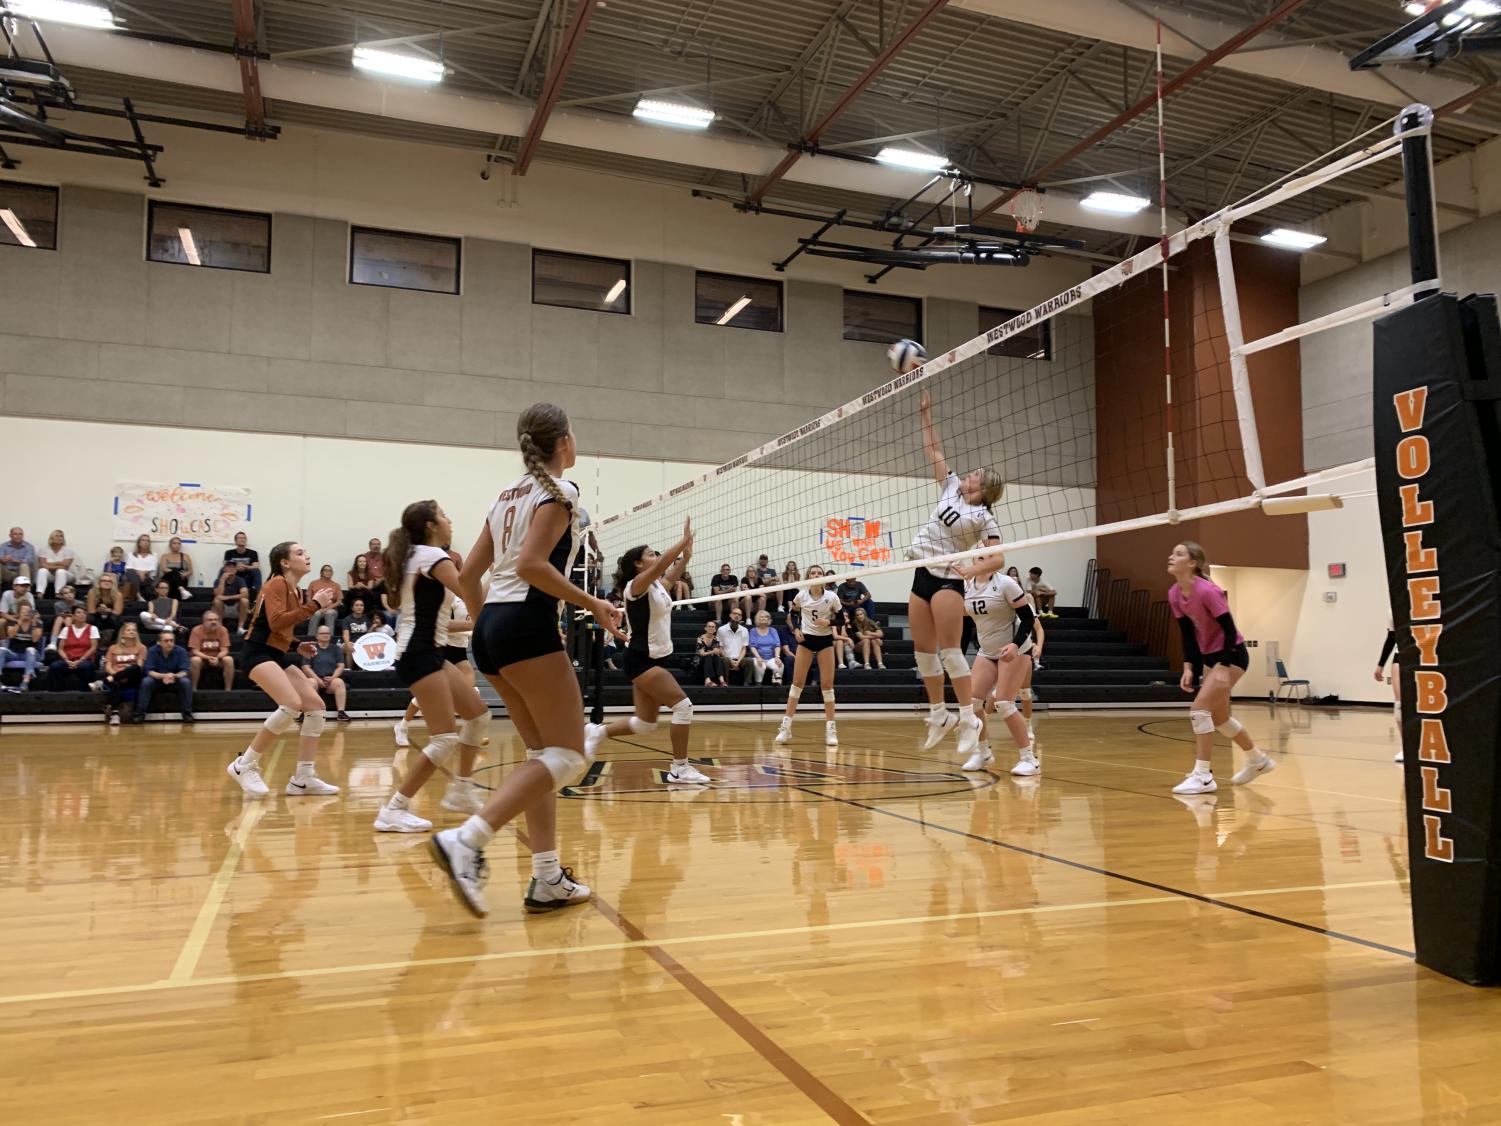 Freshman+Volleyball+Takes+Nasty+Bite+From+Vipers+2-1